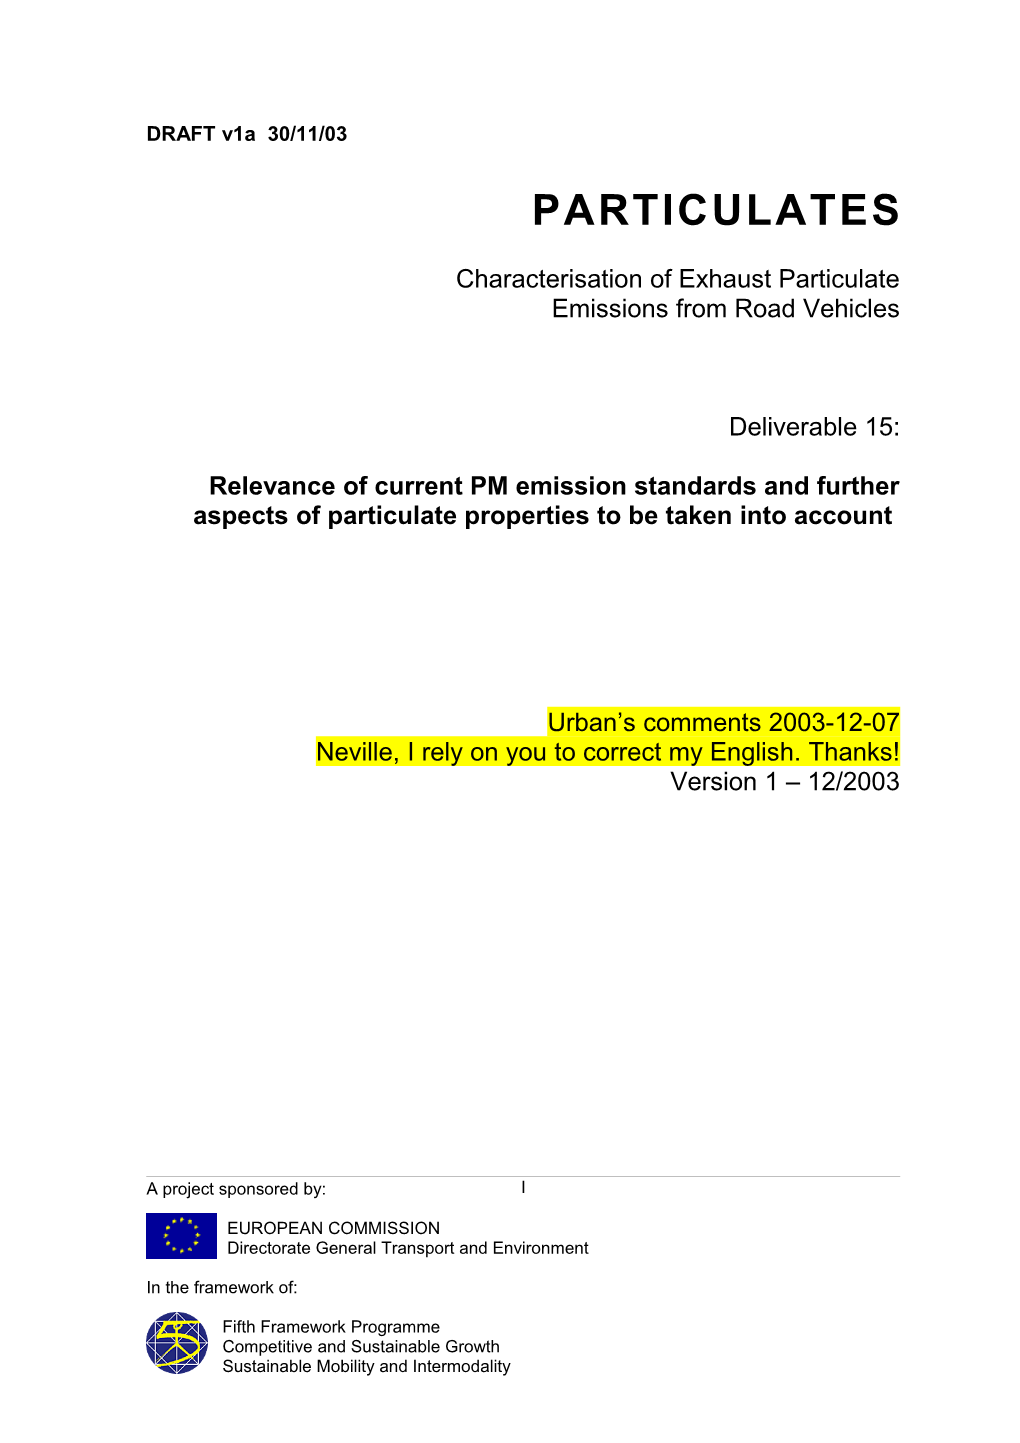 Relevance of Current PM Emission Standards and Further Aspects of Particulate Properties